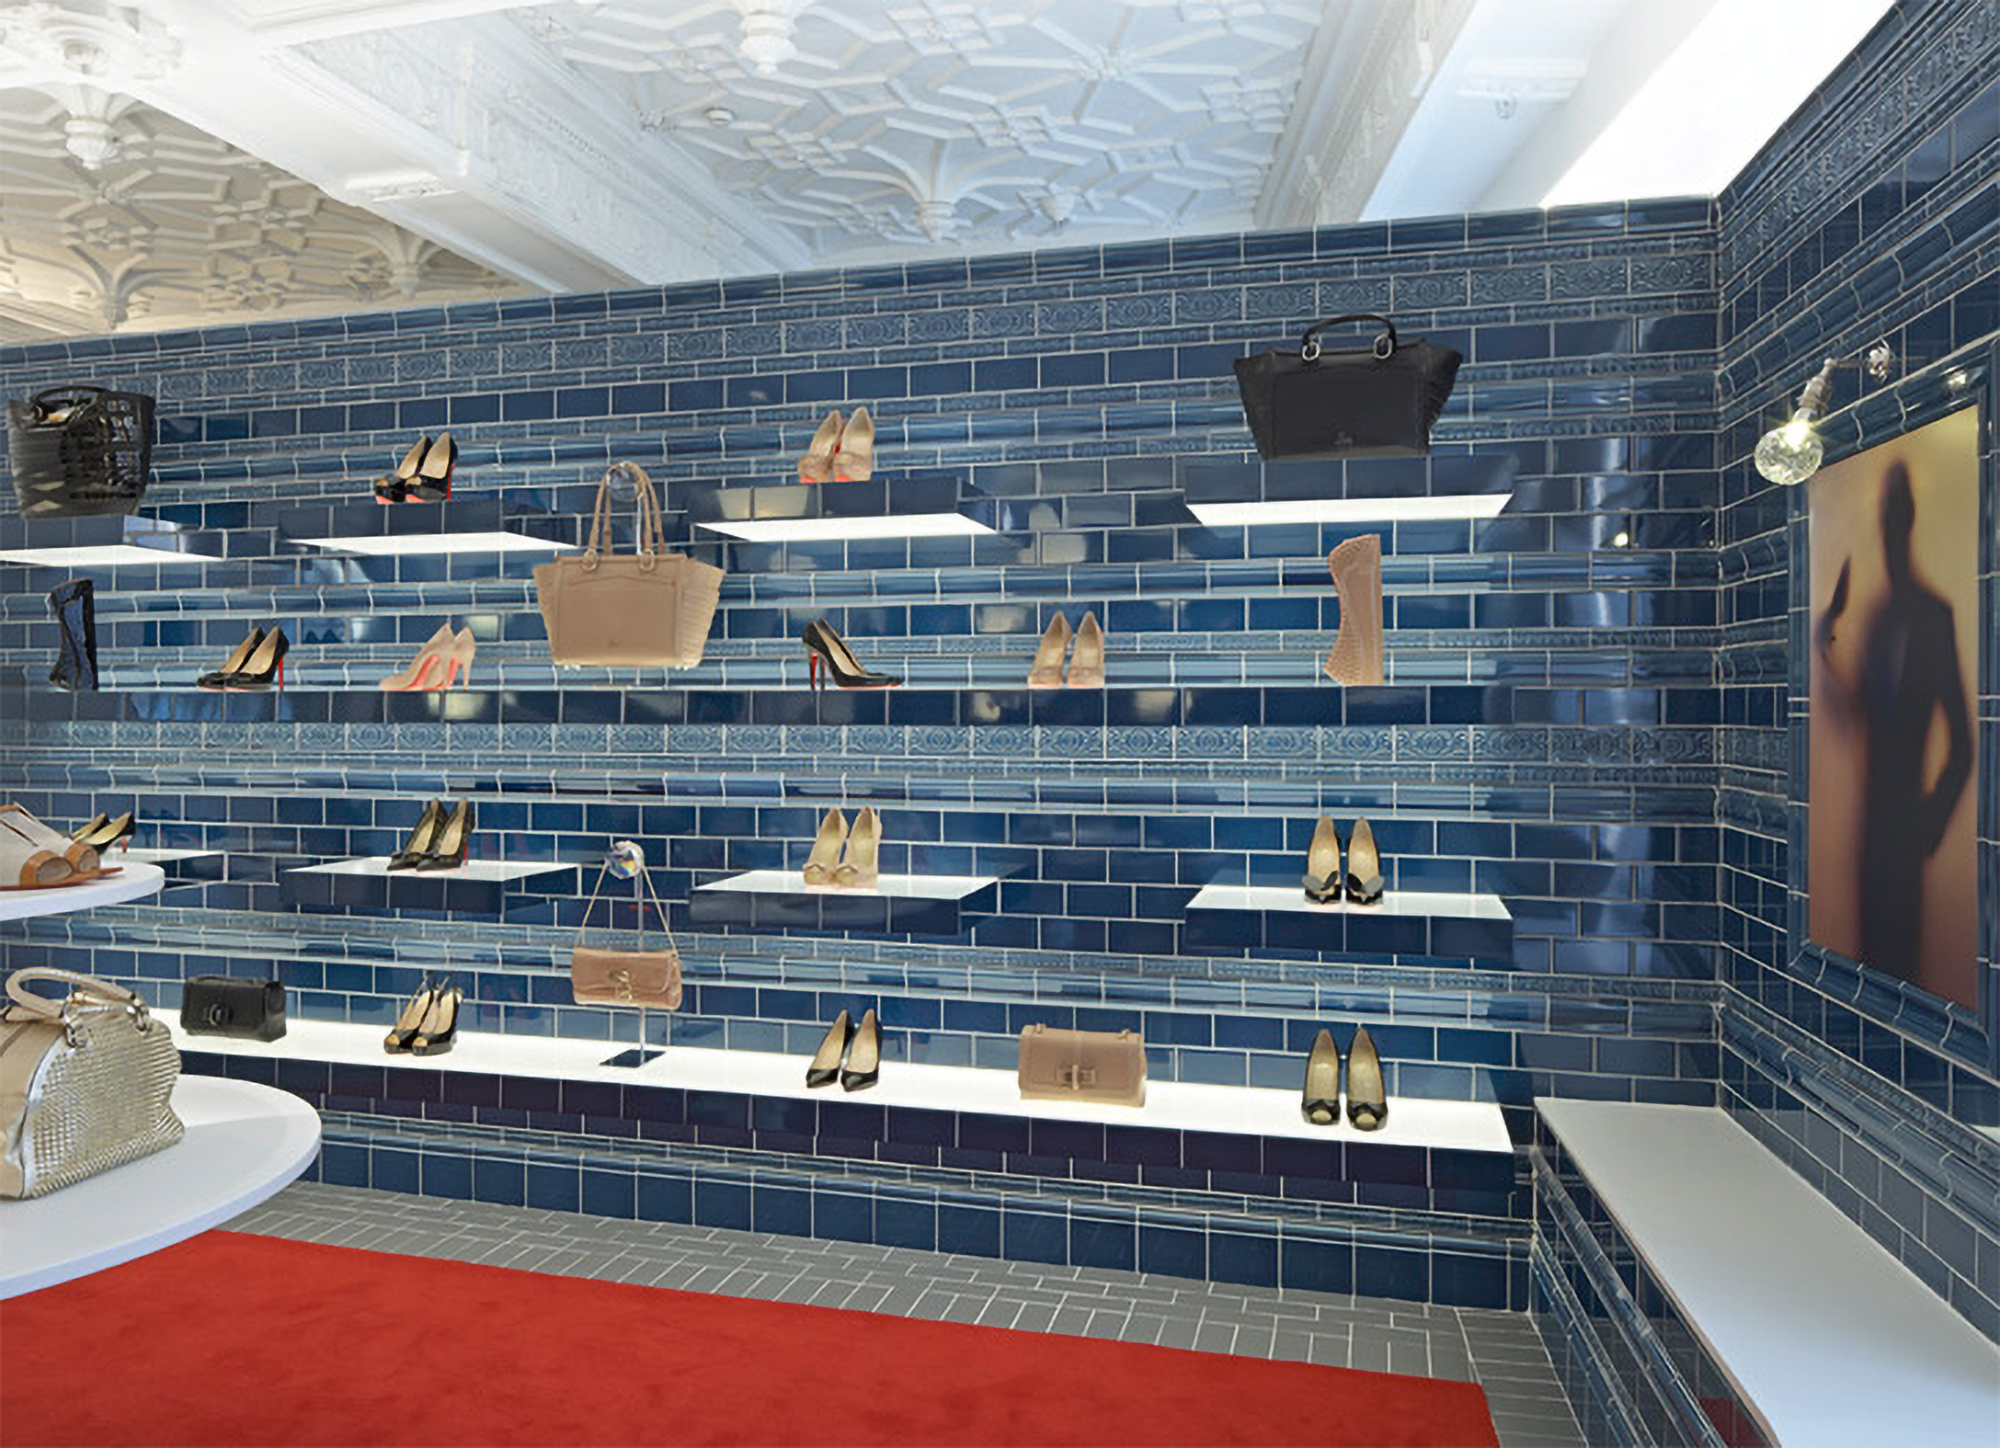 Christian Louboutin Store Period Embossed Tiles